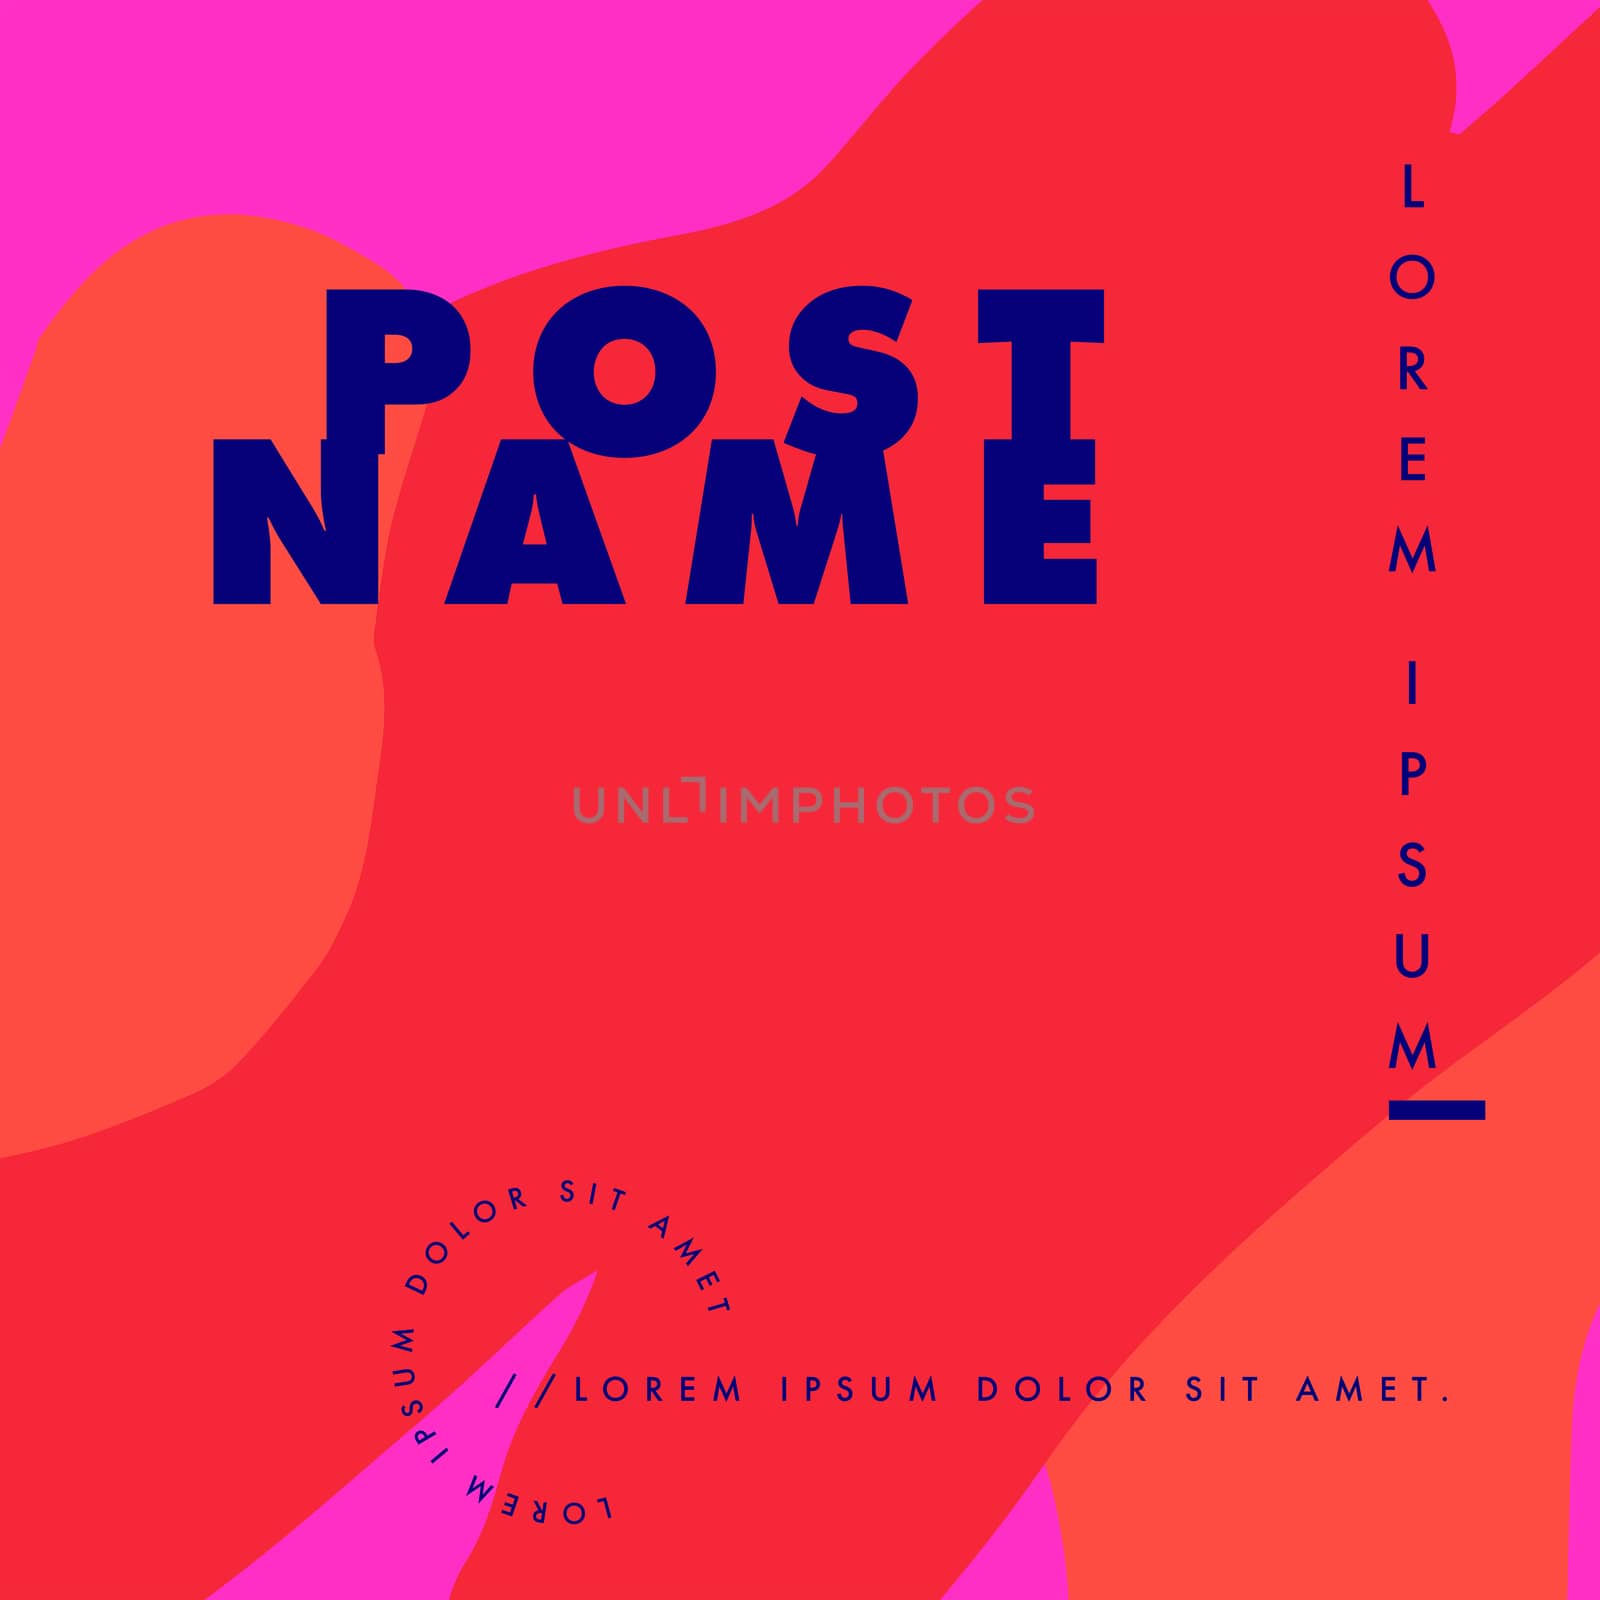 Vector image of card with text lorem ipsum and post name against colored background